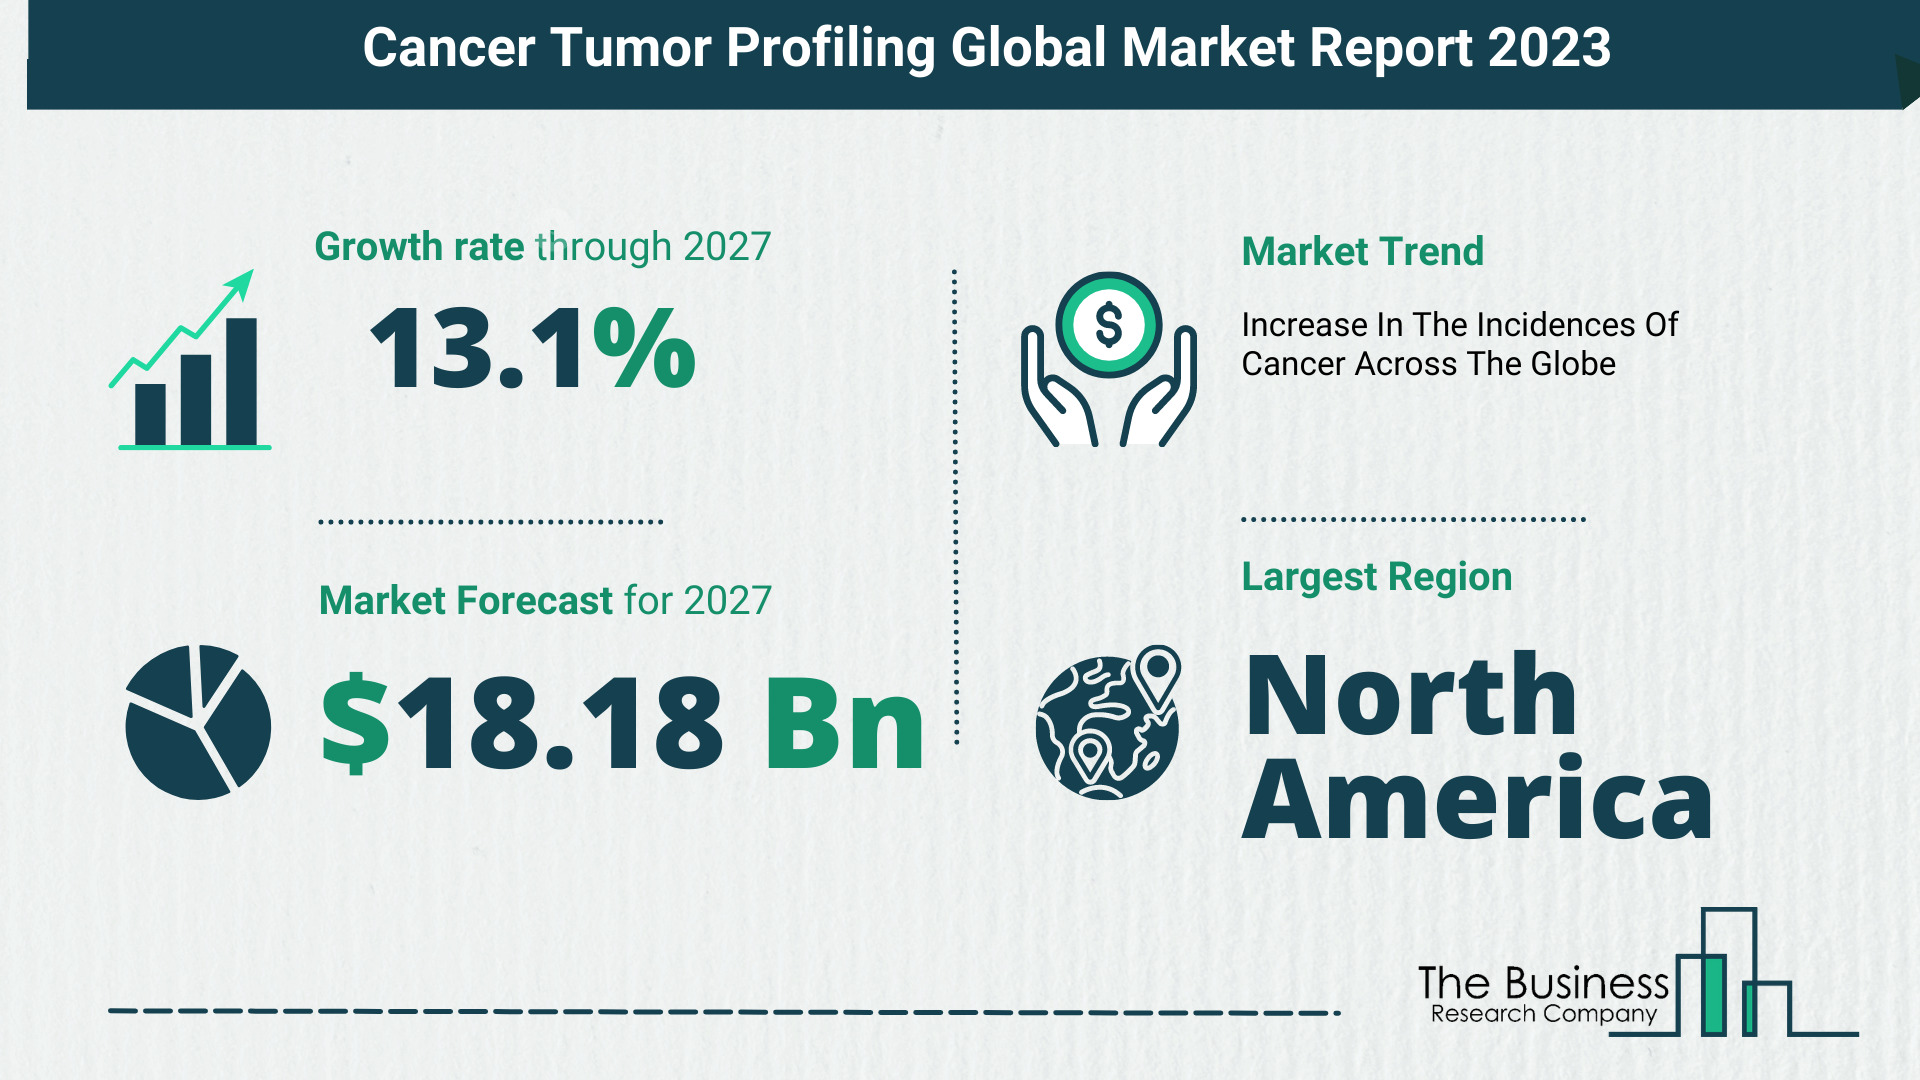 Cancer Tumor Profiling Market Overview: Market Size, Drivers And Trends